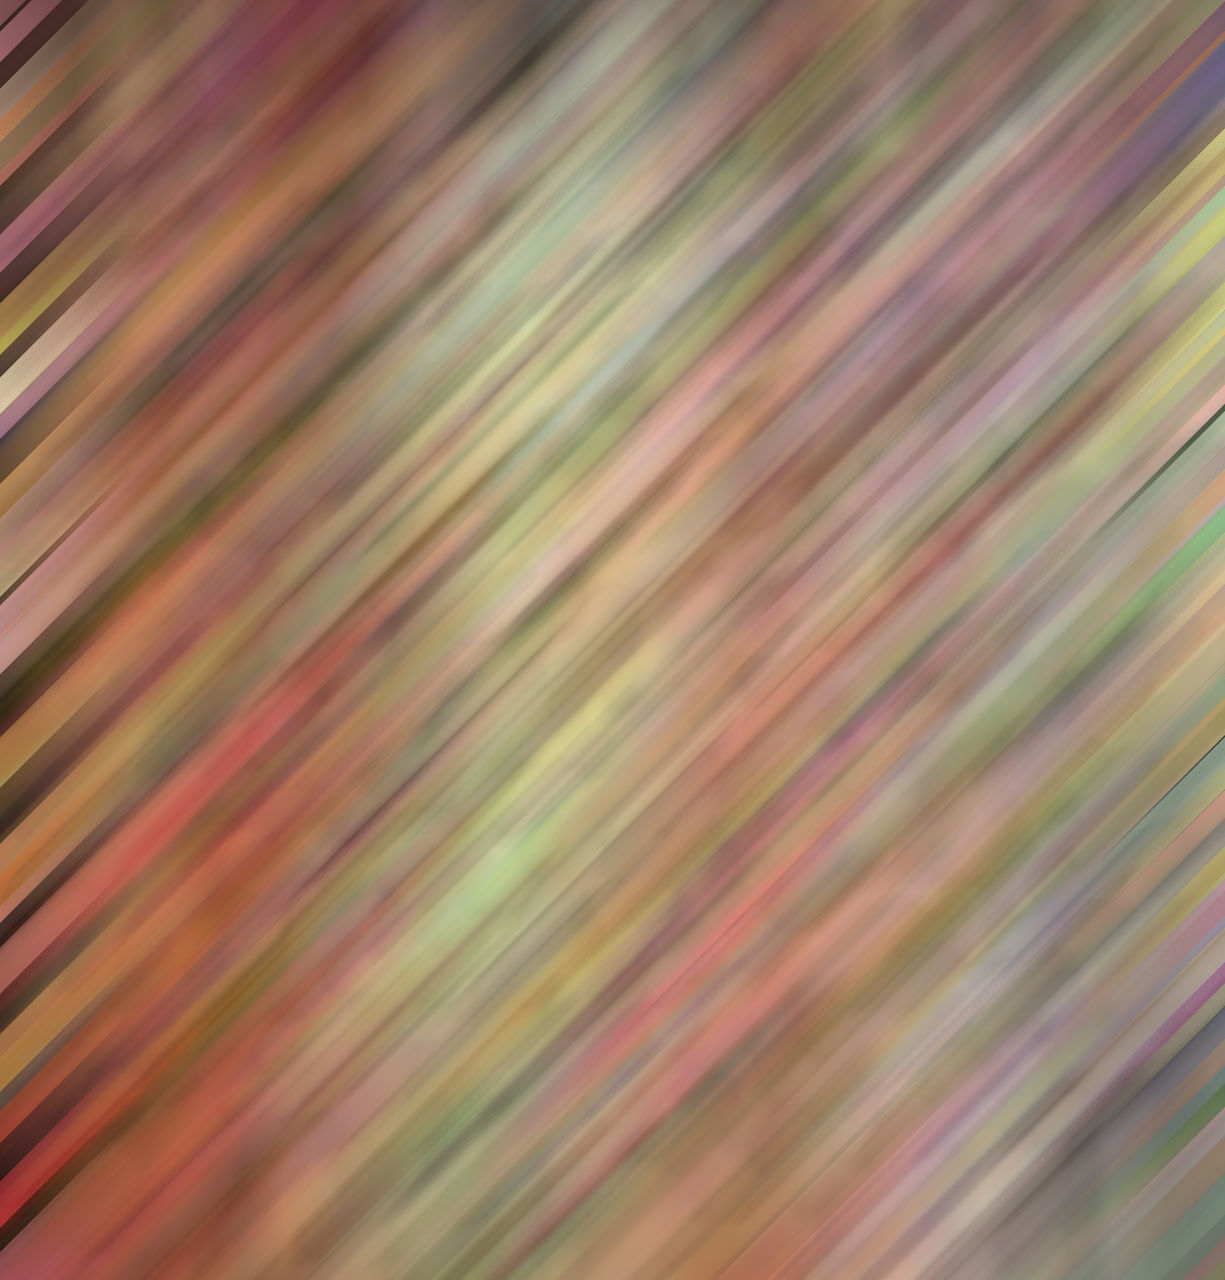 DEFOCUSED IMAGE OF ABSTRACT BACKGROUND